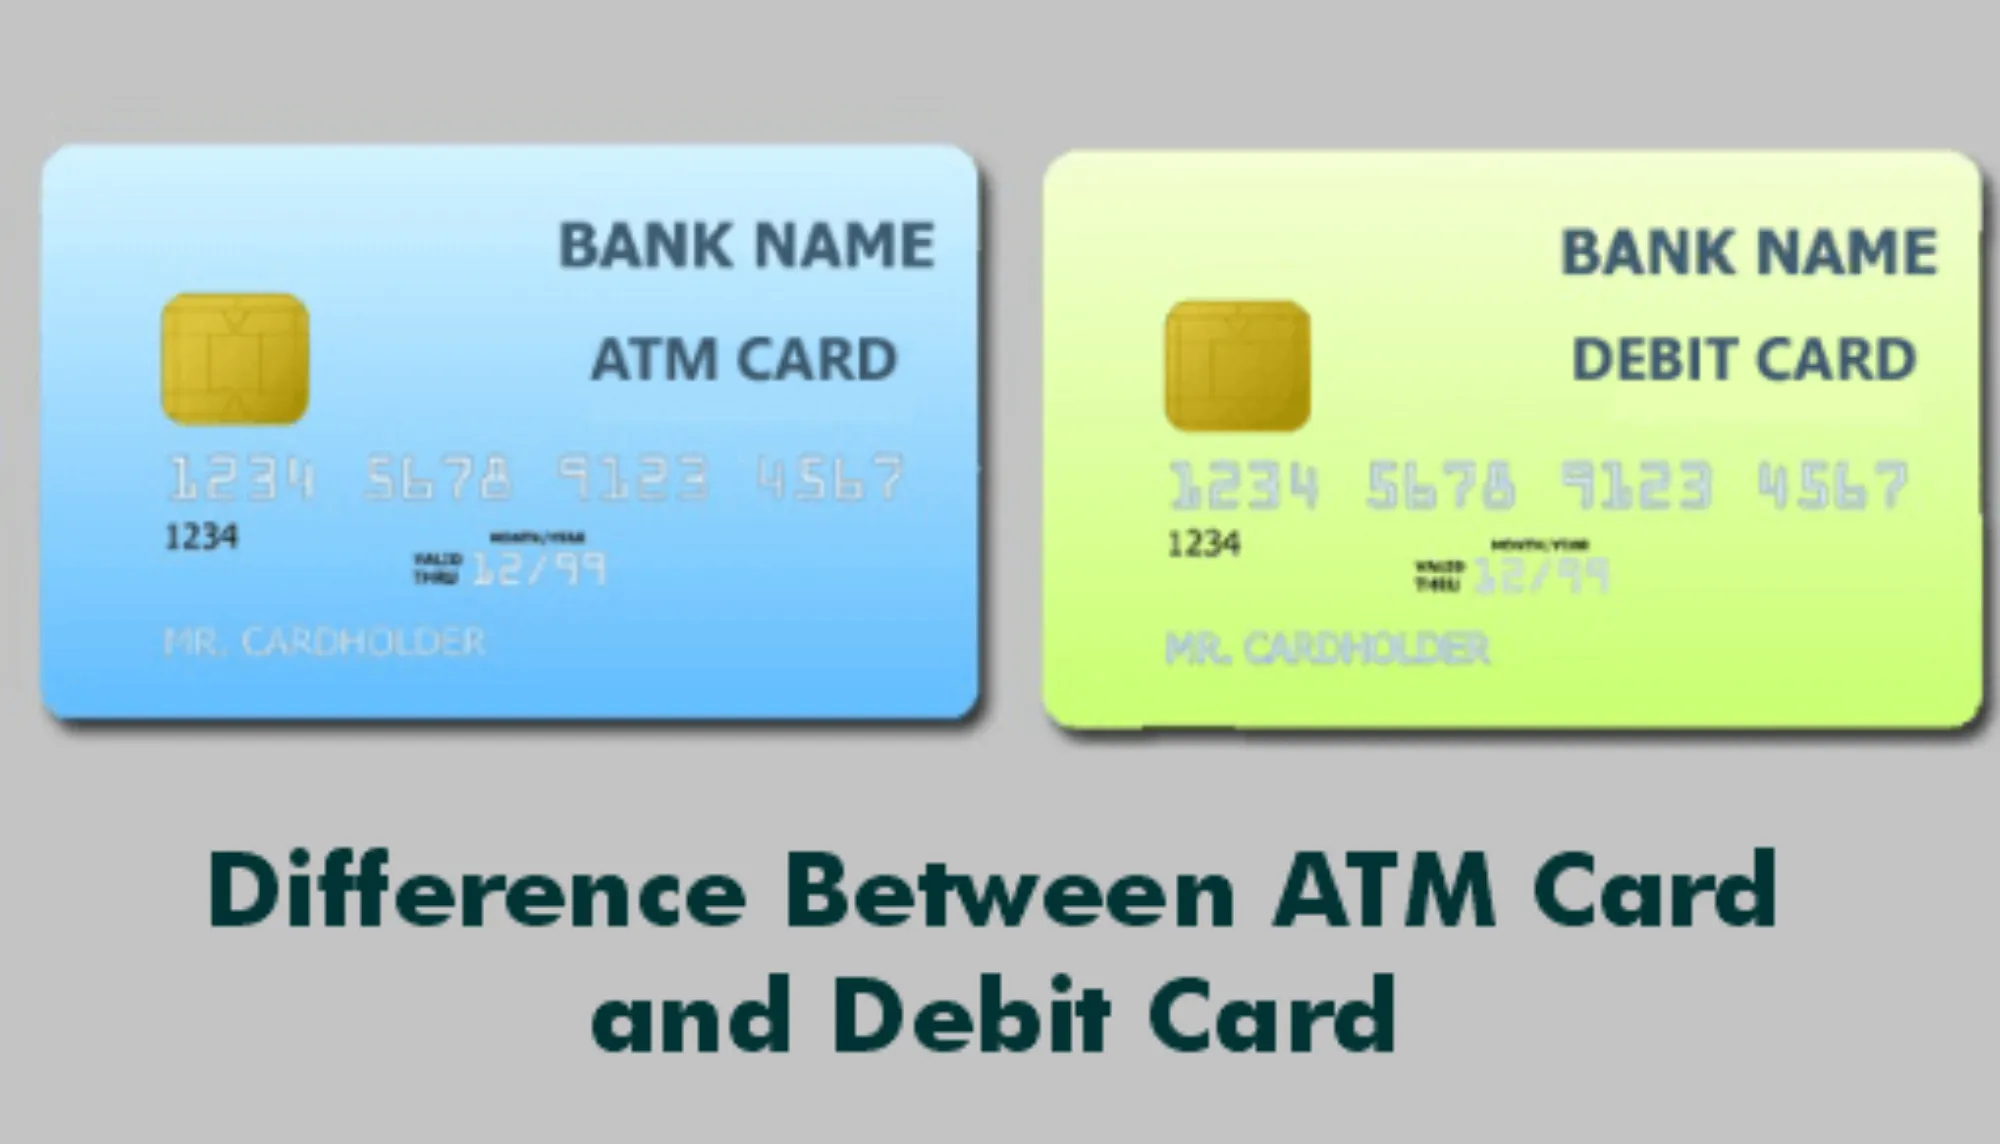 Are Atm And Debit Cards The Same Thing?